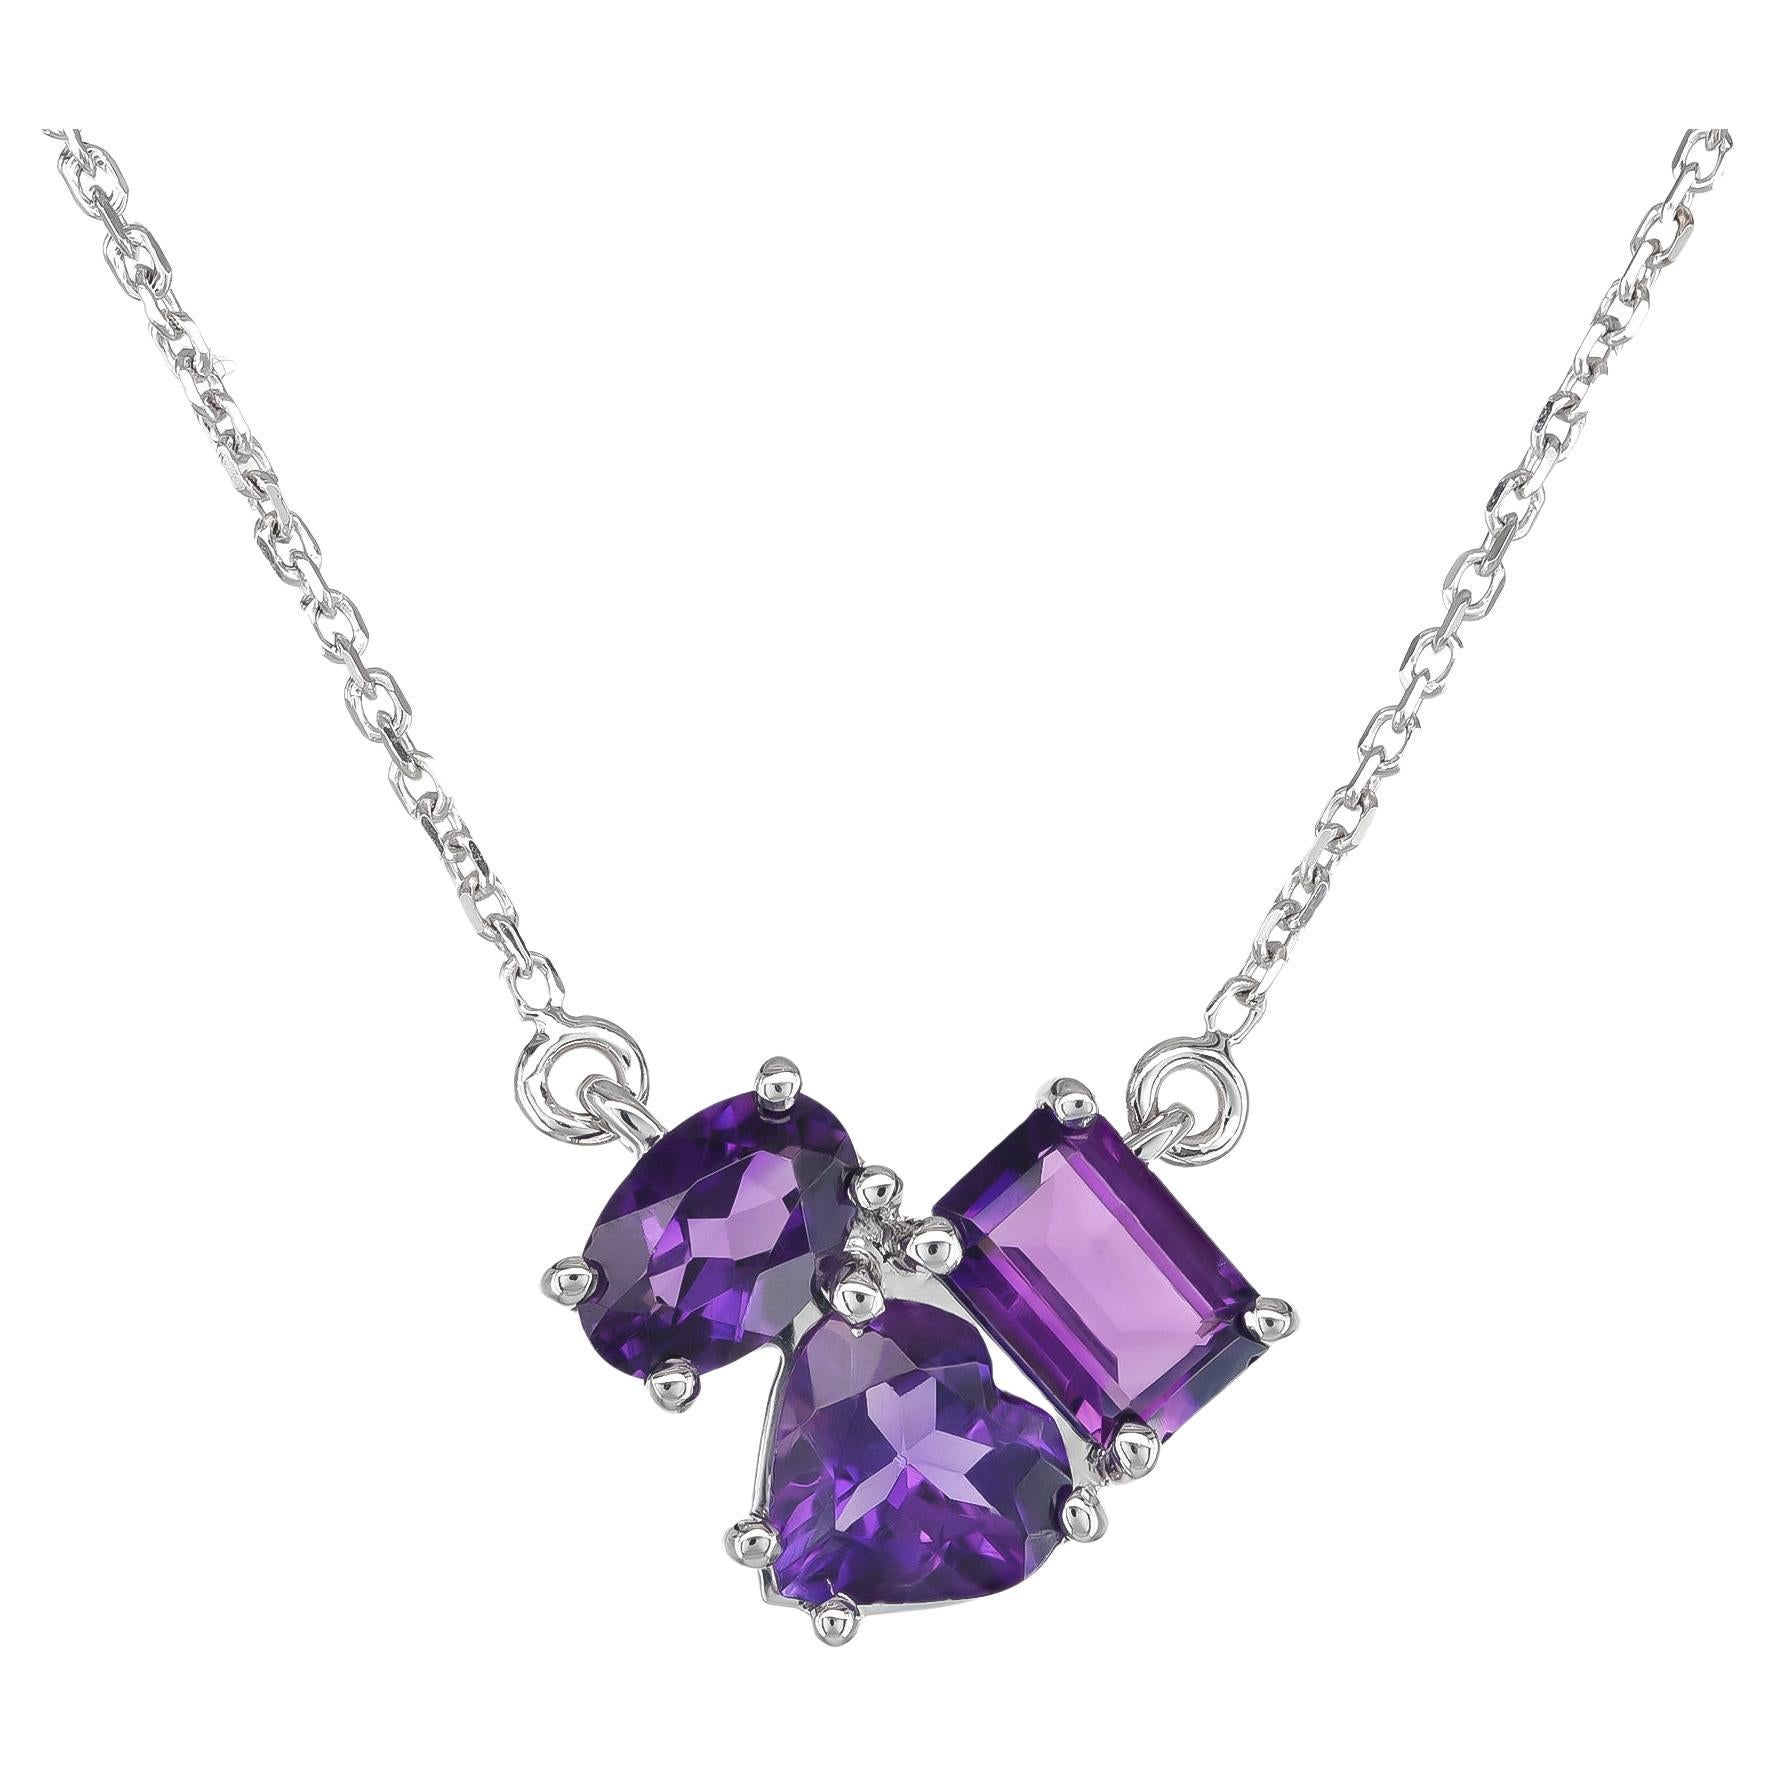 Pendant with 1.42 carats Amethyst set in 14K White Gold For Sale